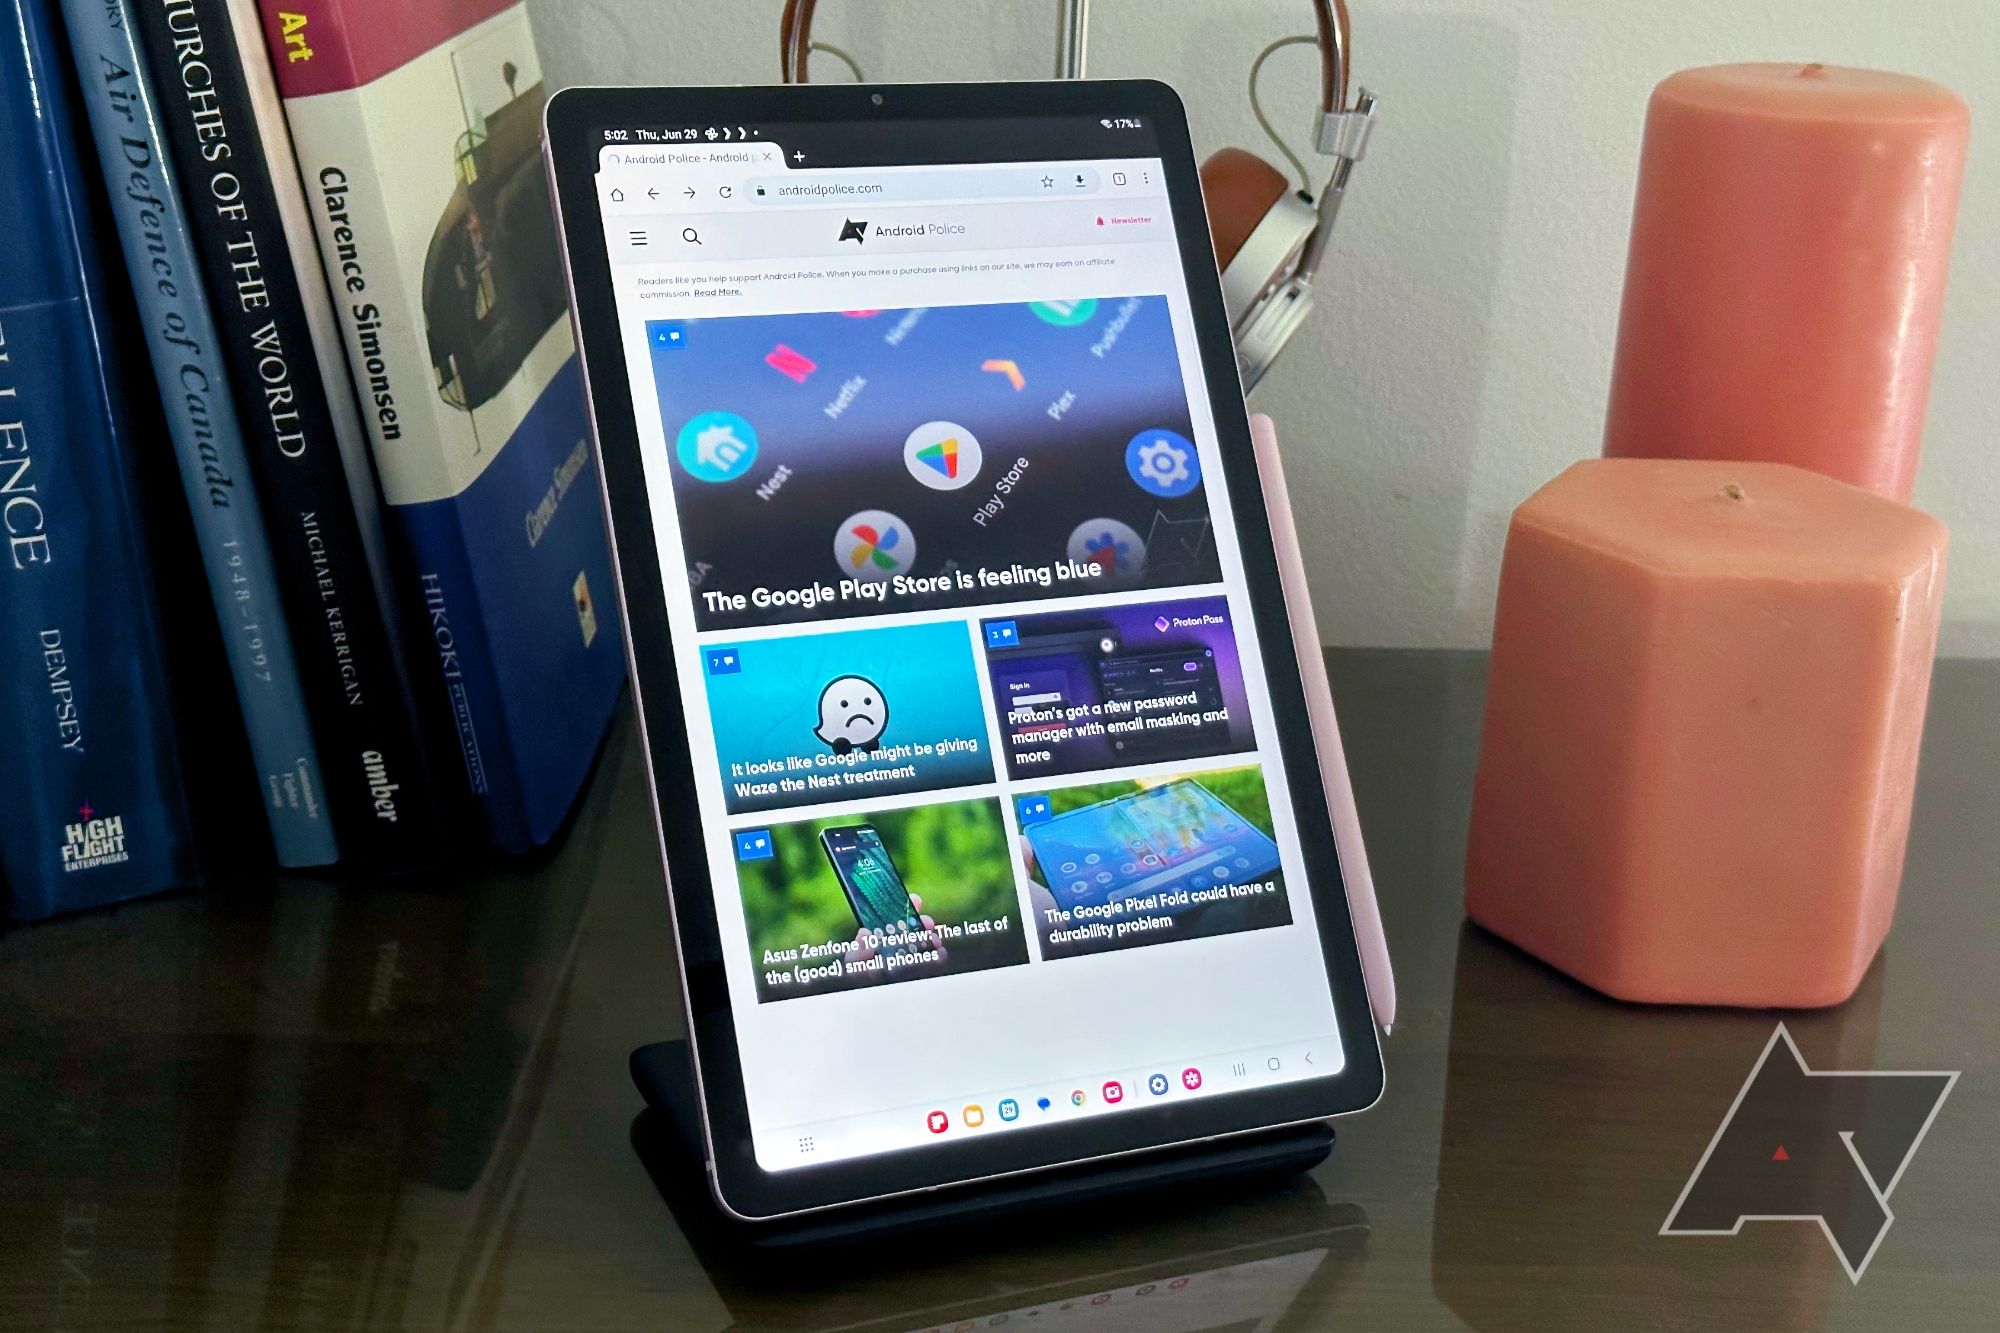 Samsung Galaxy Tab S6 Lite (2022) specs, pricing, and marketing images  revealed -  News